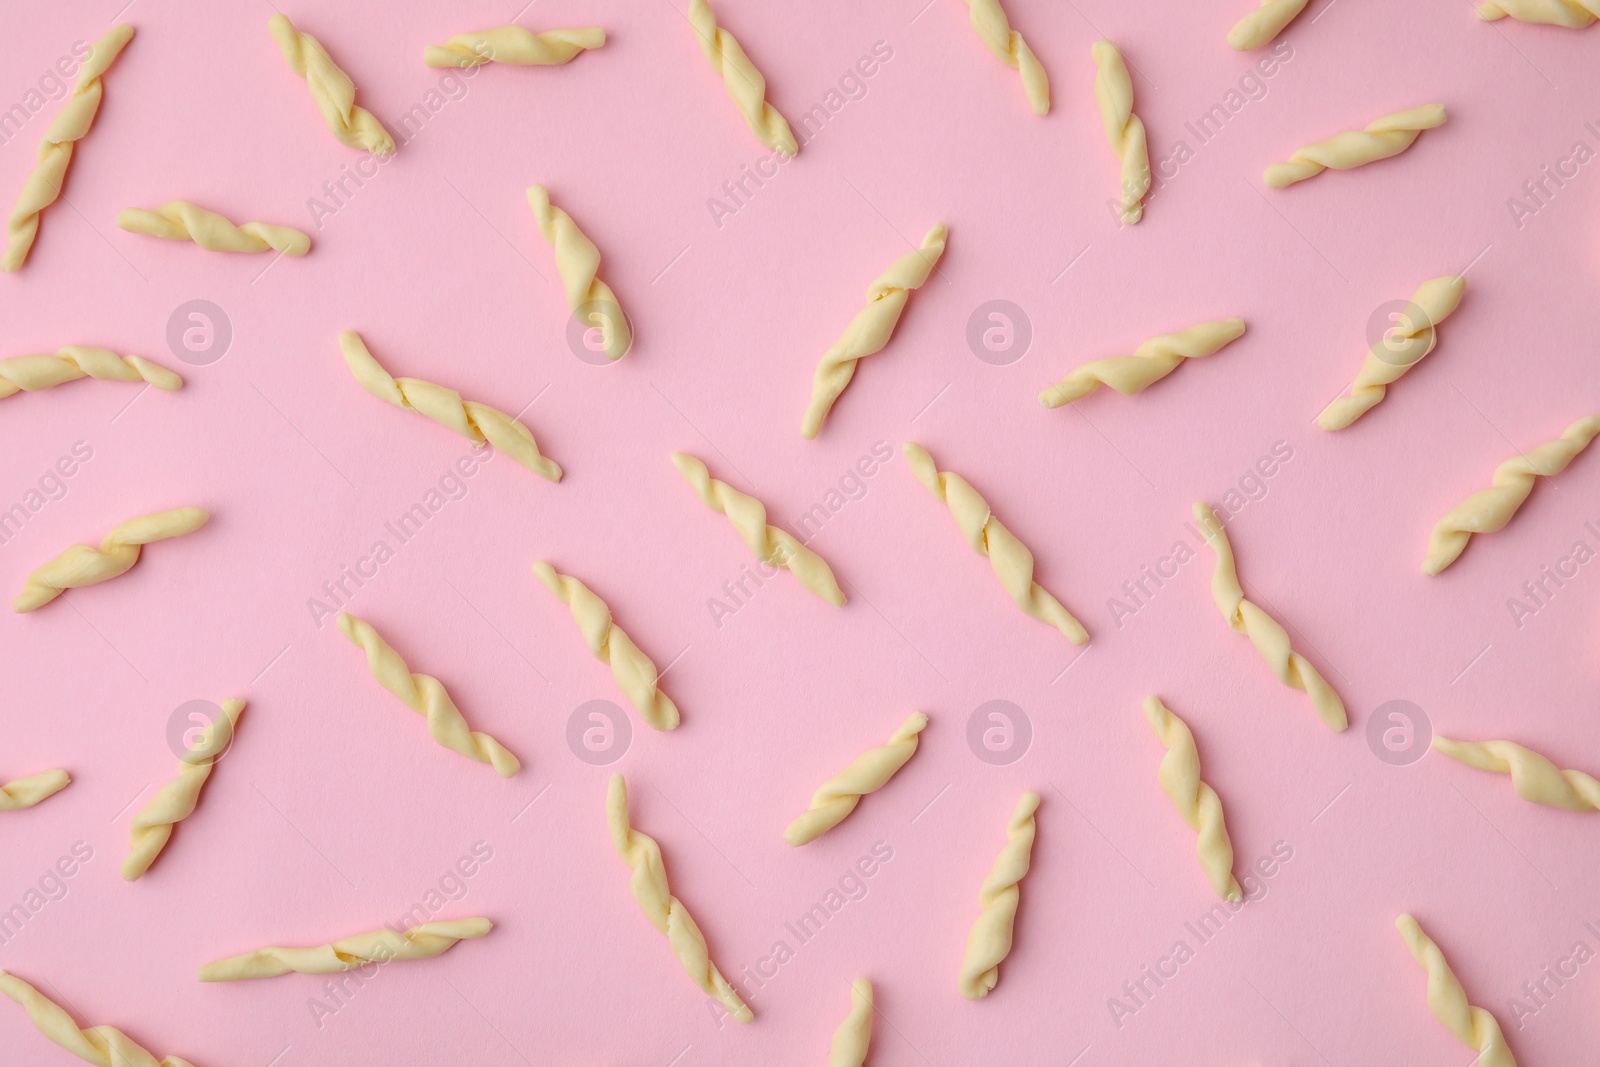 Photo of Uncooked trofie pasta on pink background, flat lay